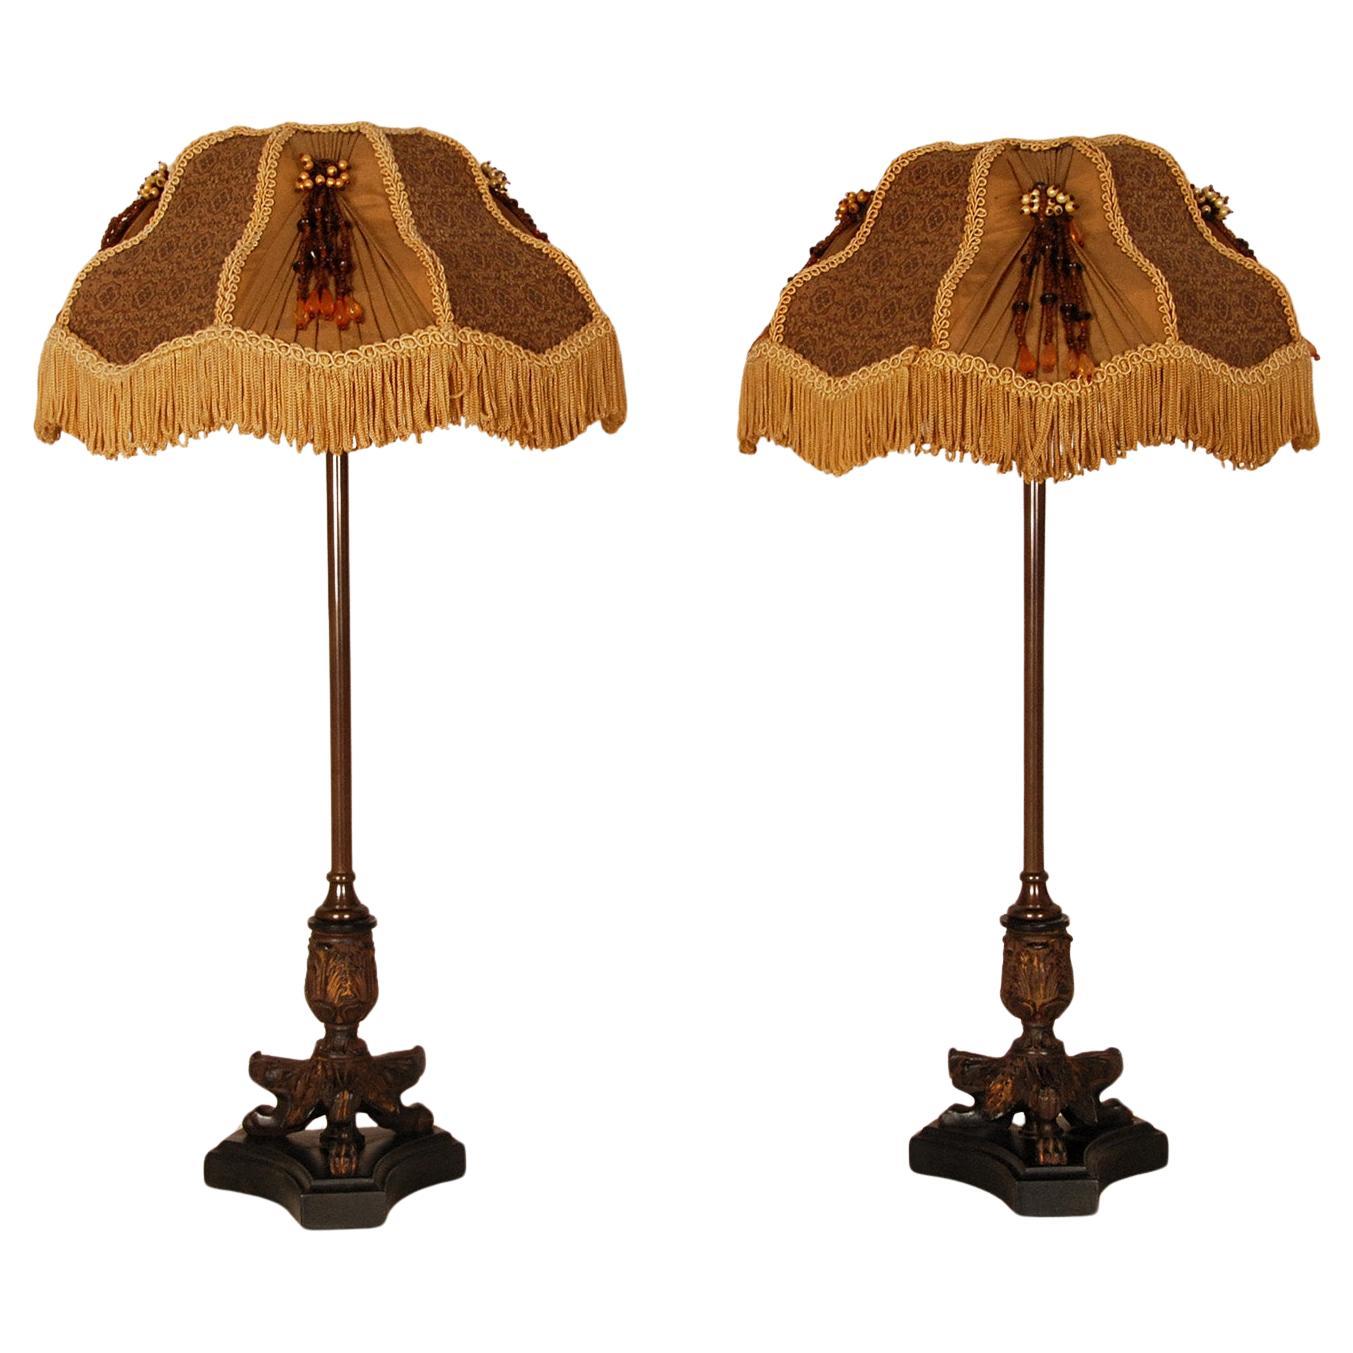 Vintage French Napoleonic Table Lamps Tripod Base Lion Paws Empire Lamps a Pair For Sale